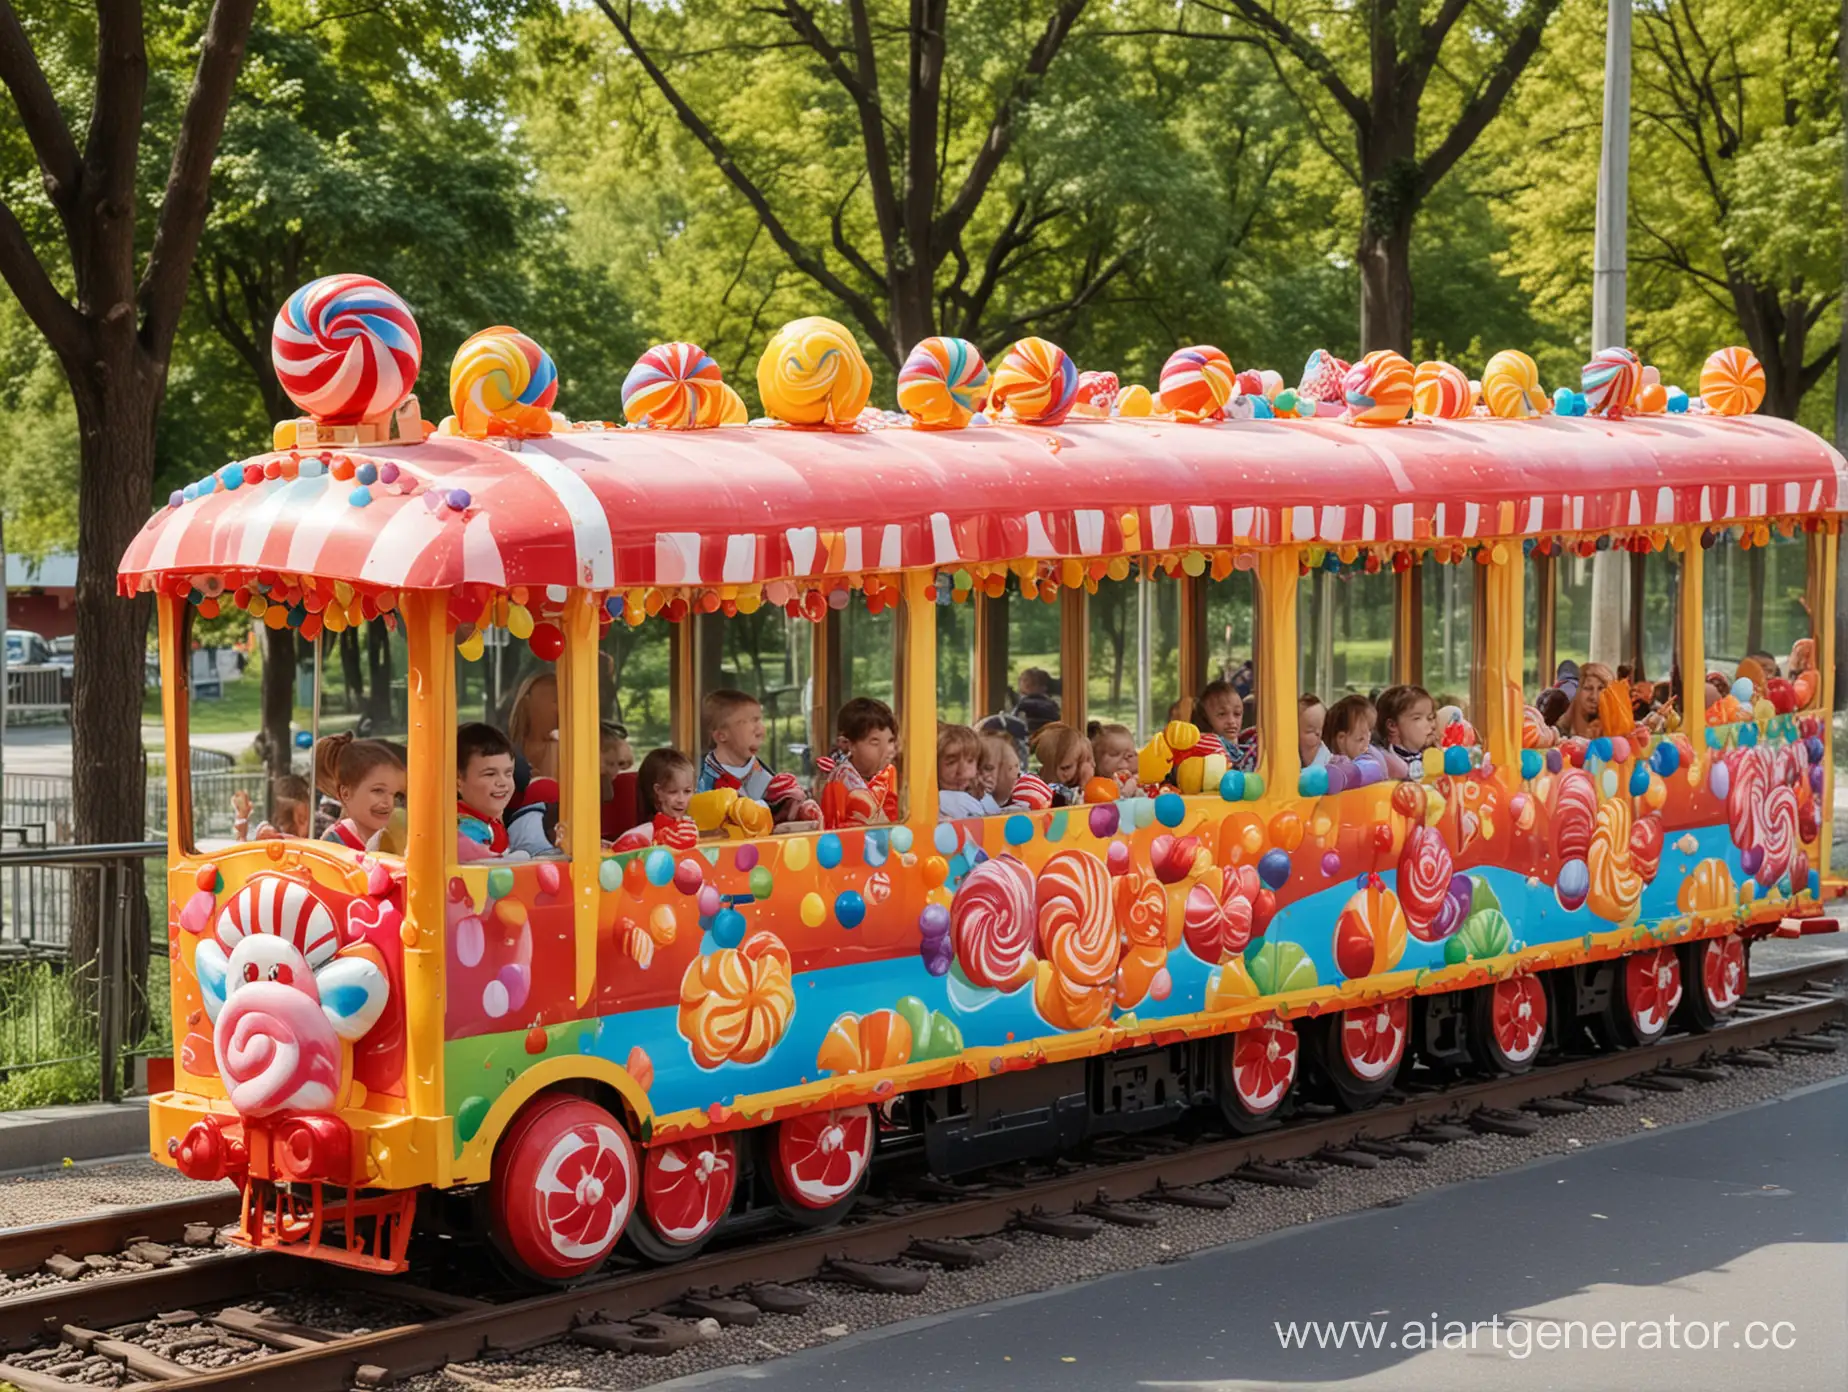 Colorful-Candy-Train-Ride-for-Kids-in-Park-Setting